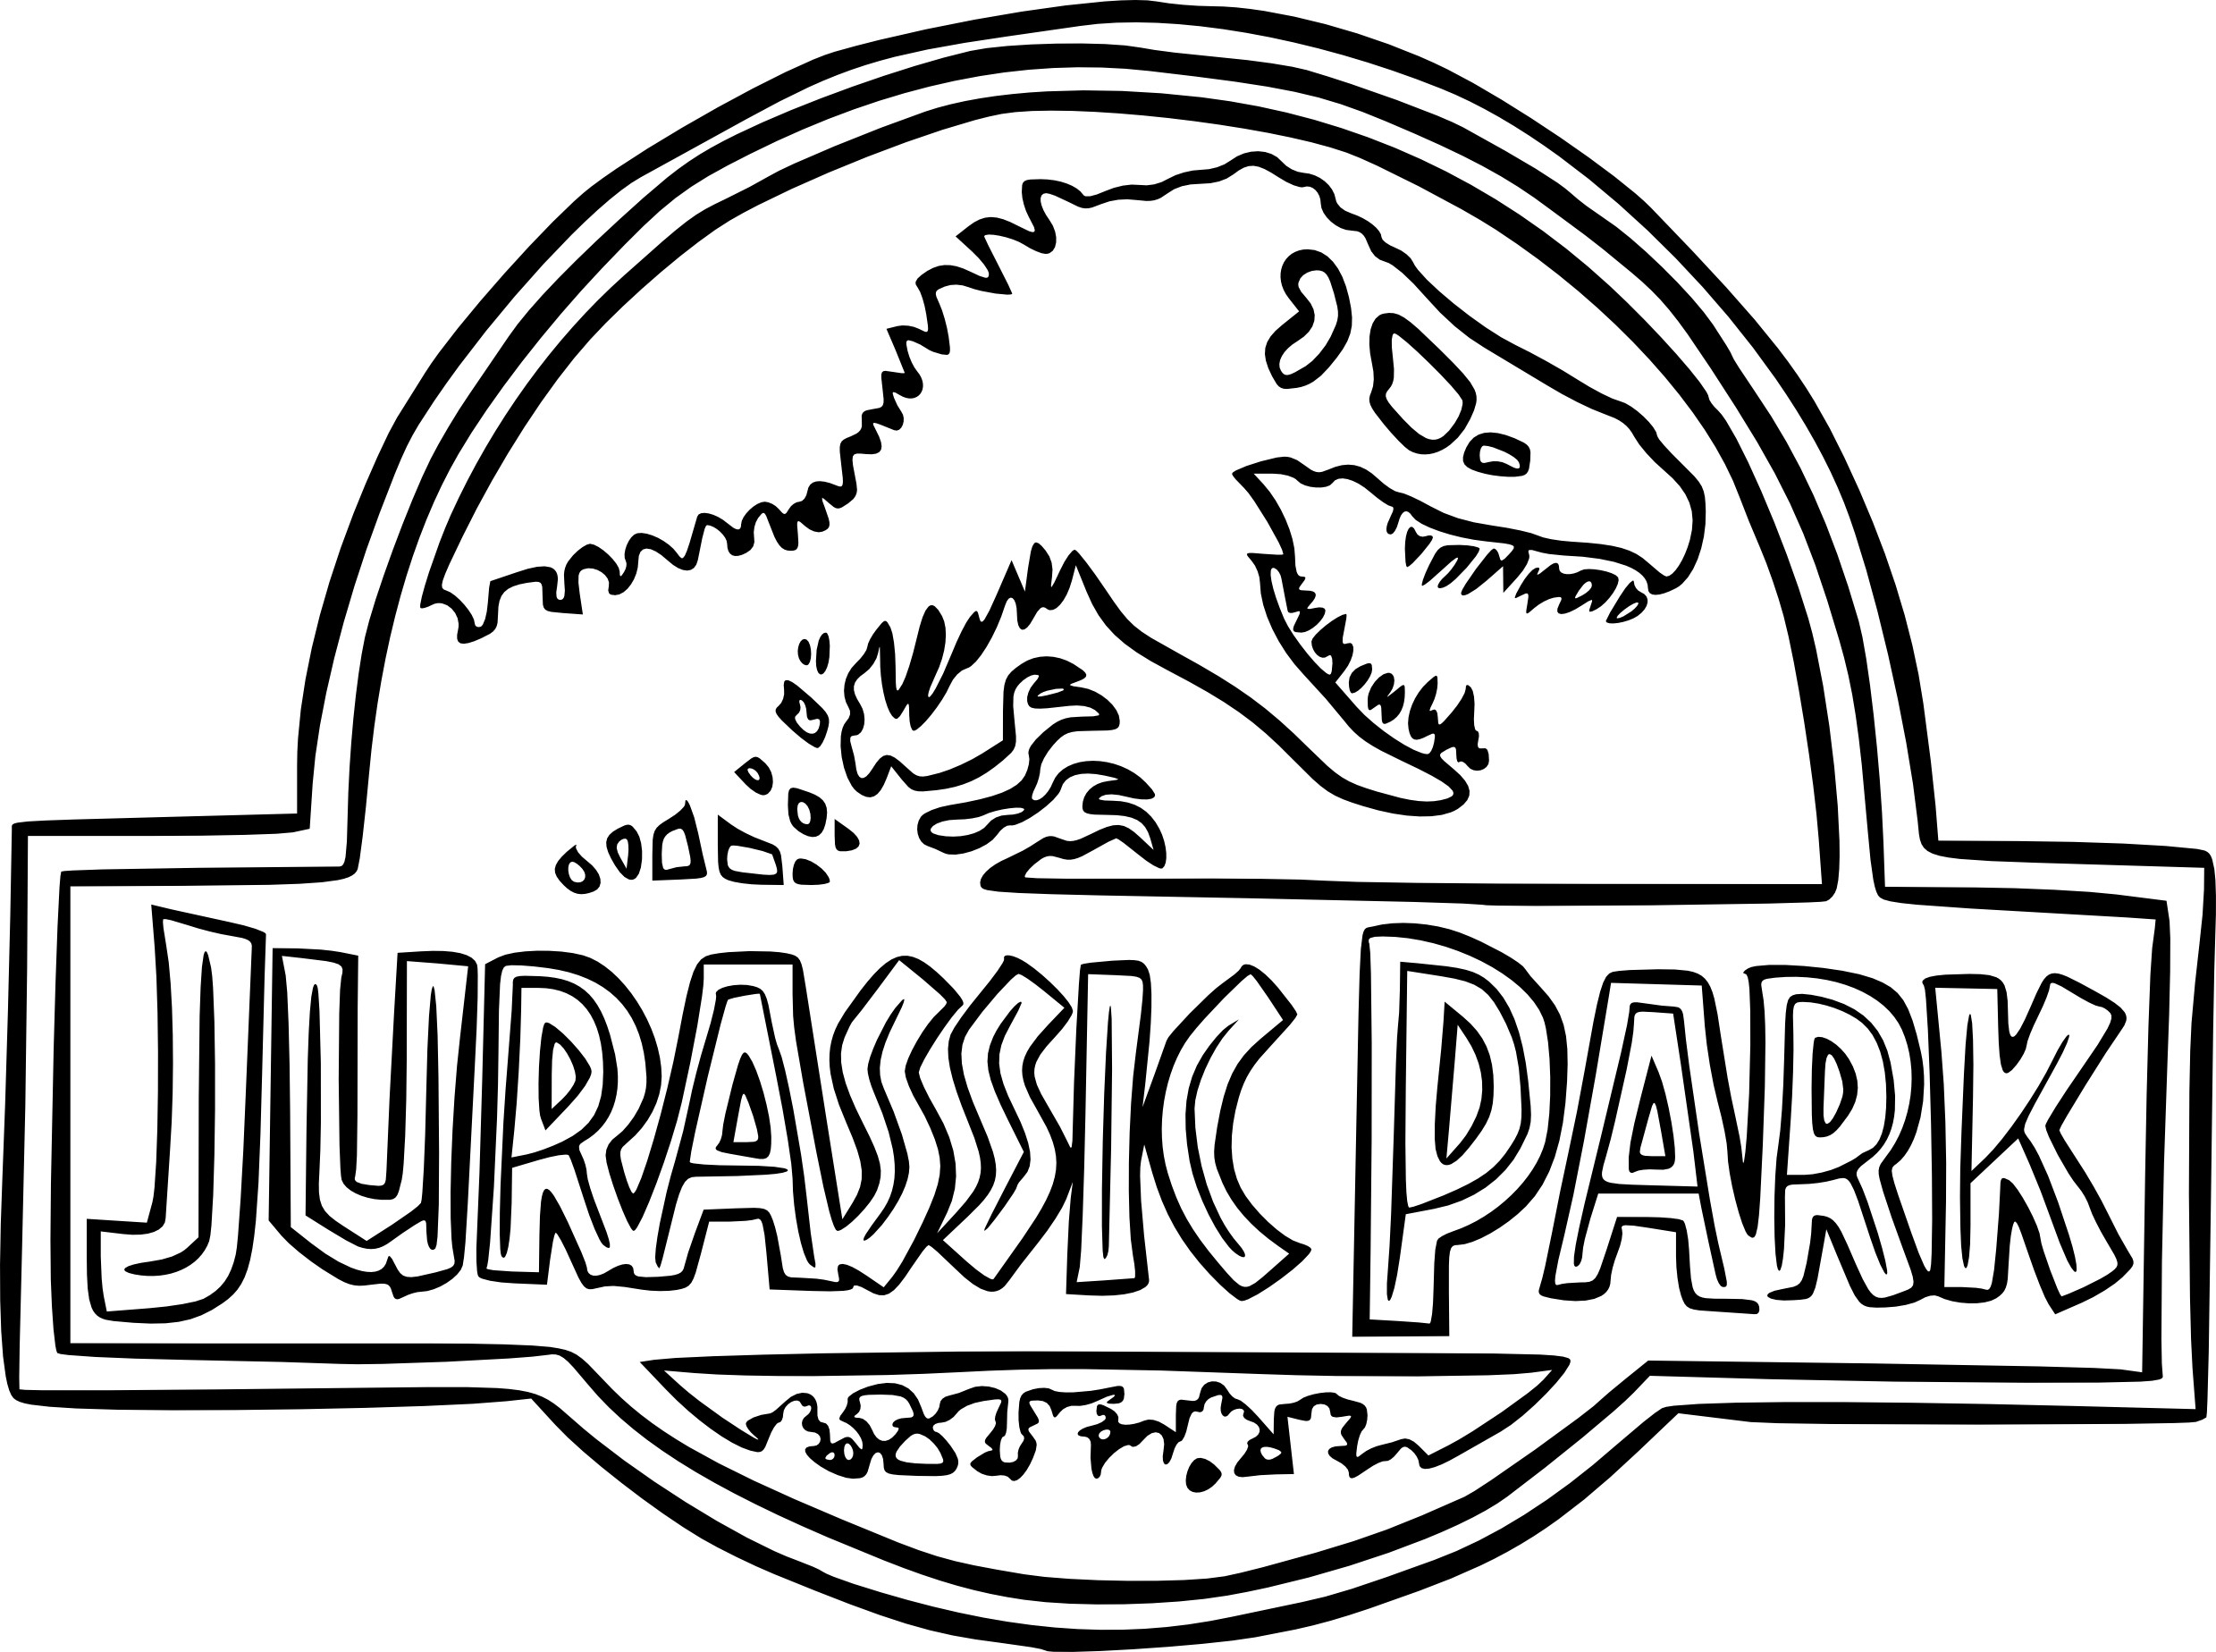 Jurassic Park Coloring Pages at GetColorings.com | Free printable ...